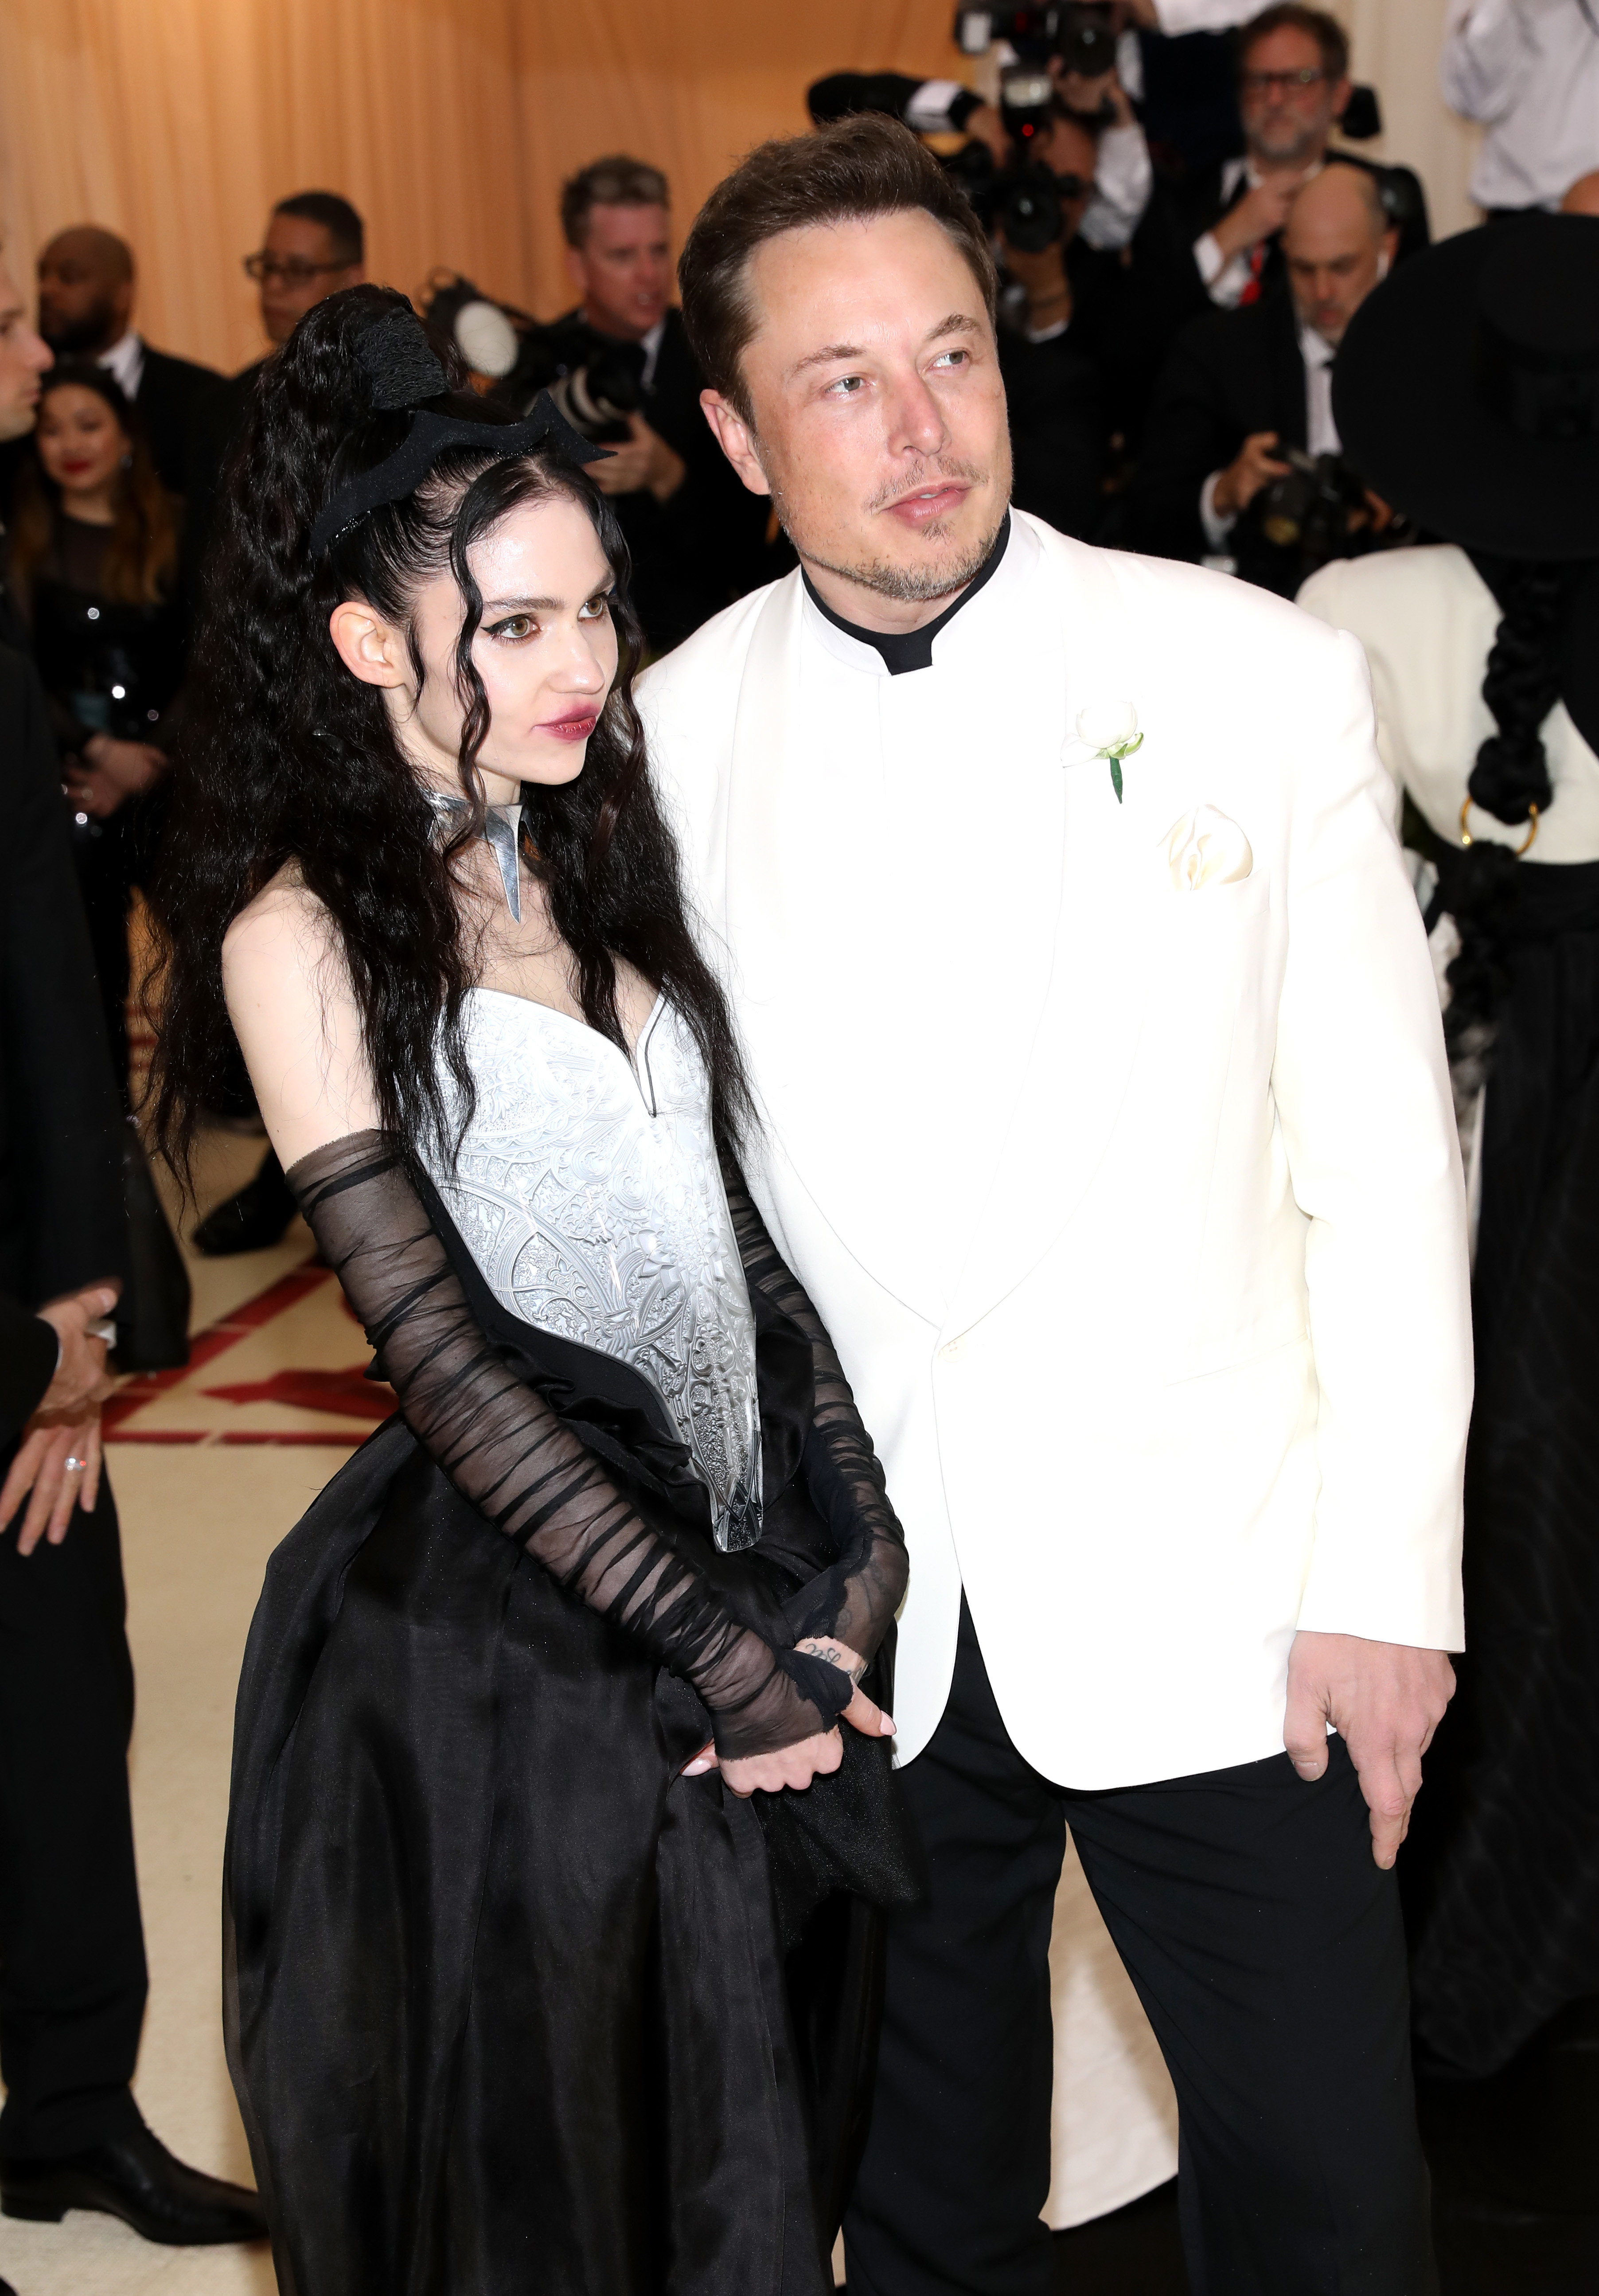 Close-up of Grimes and Elon at a formal event